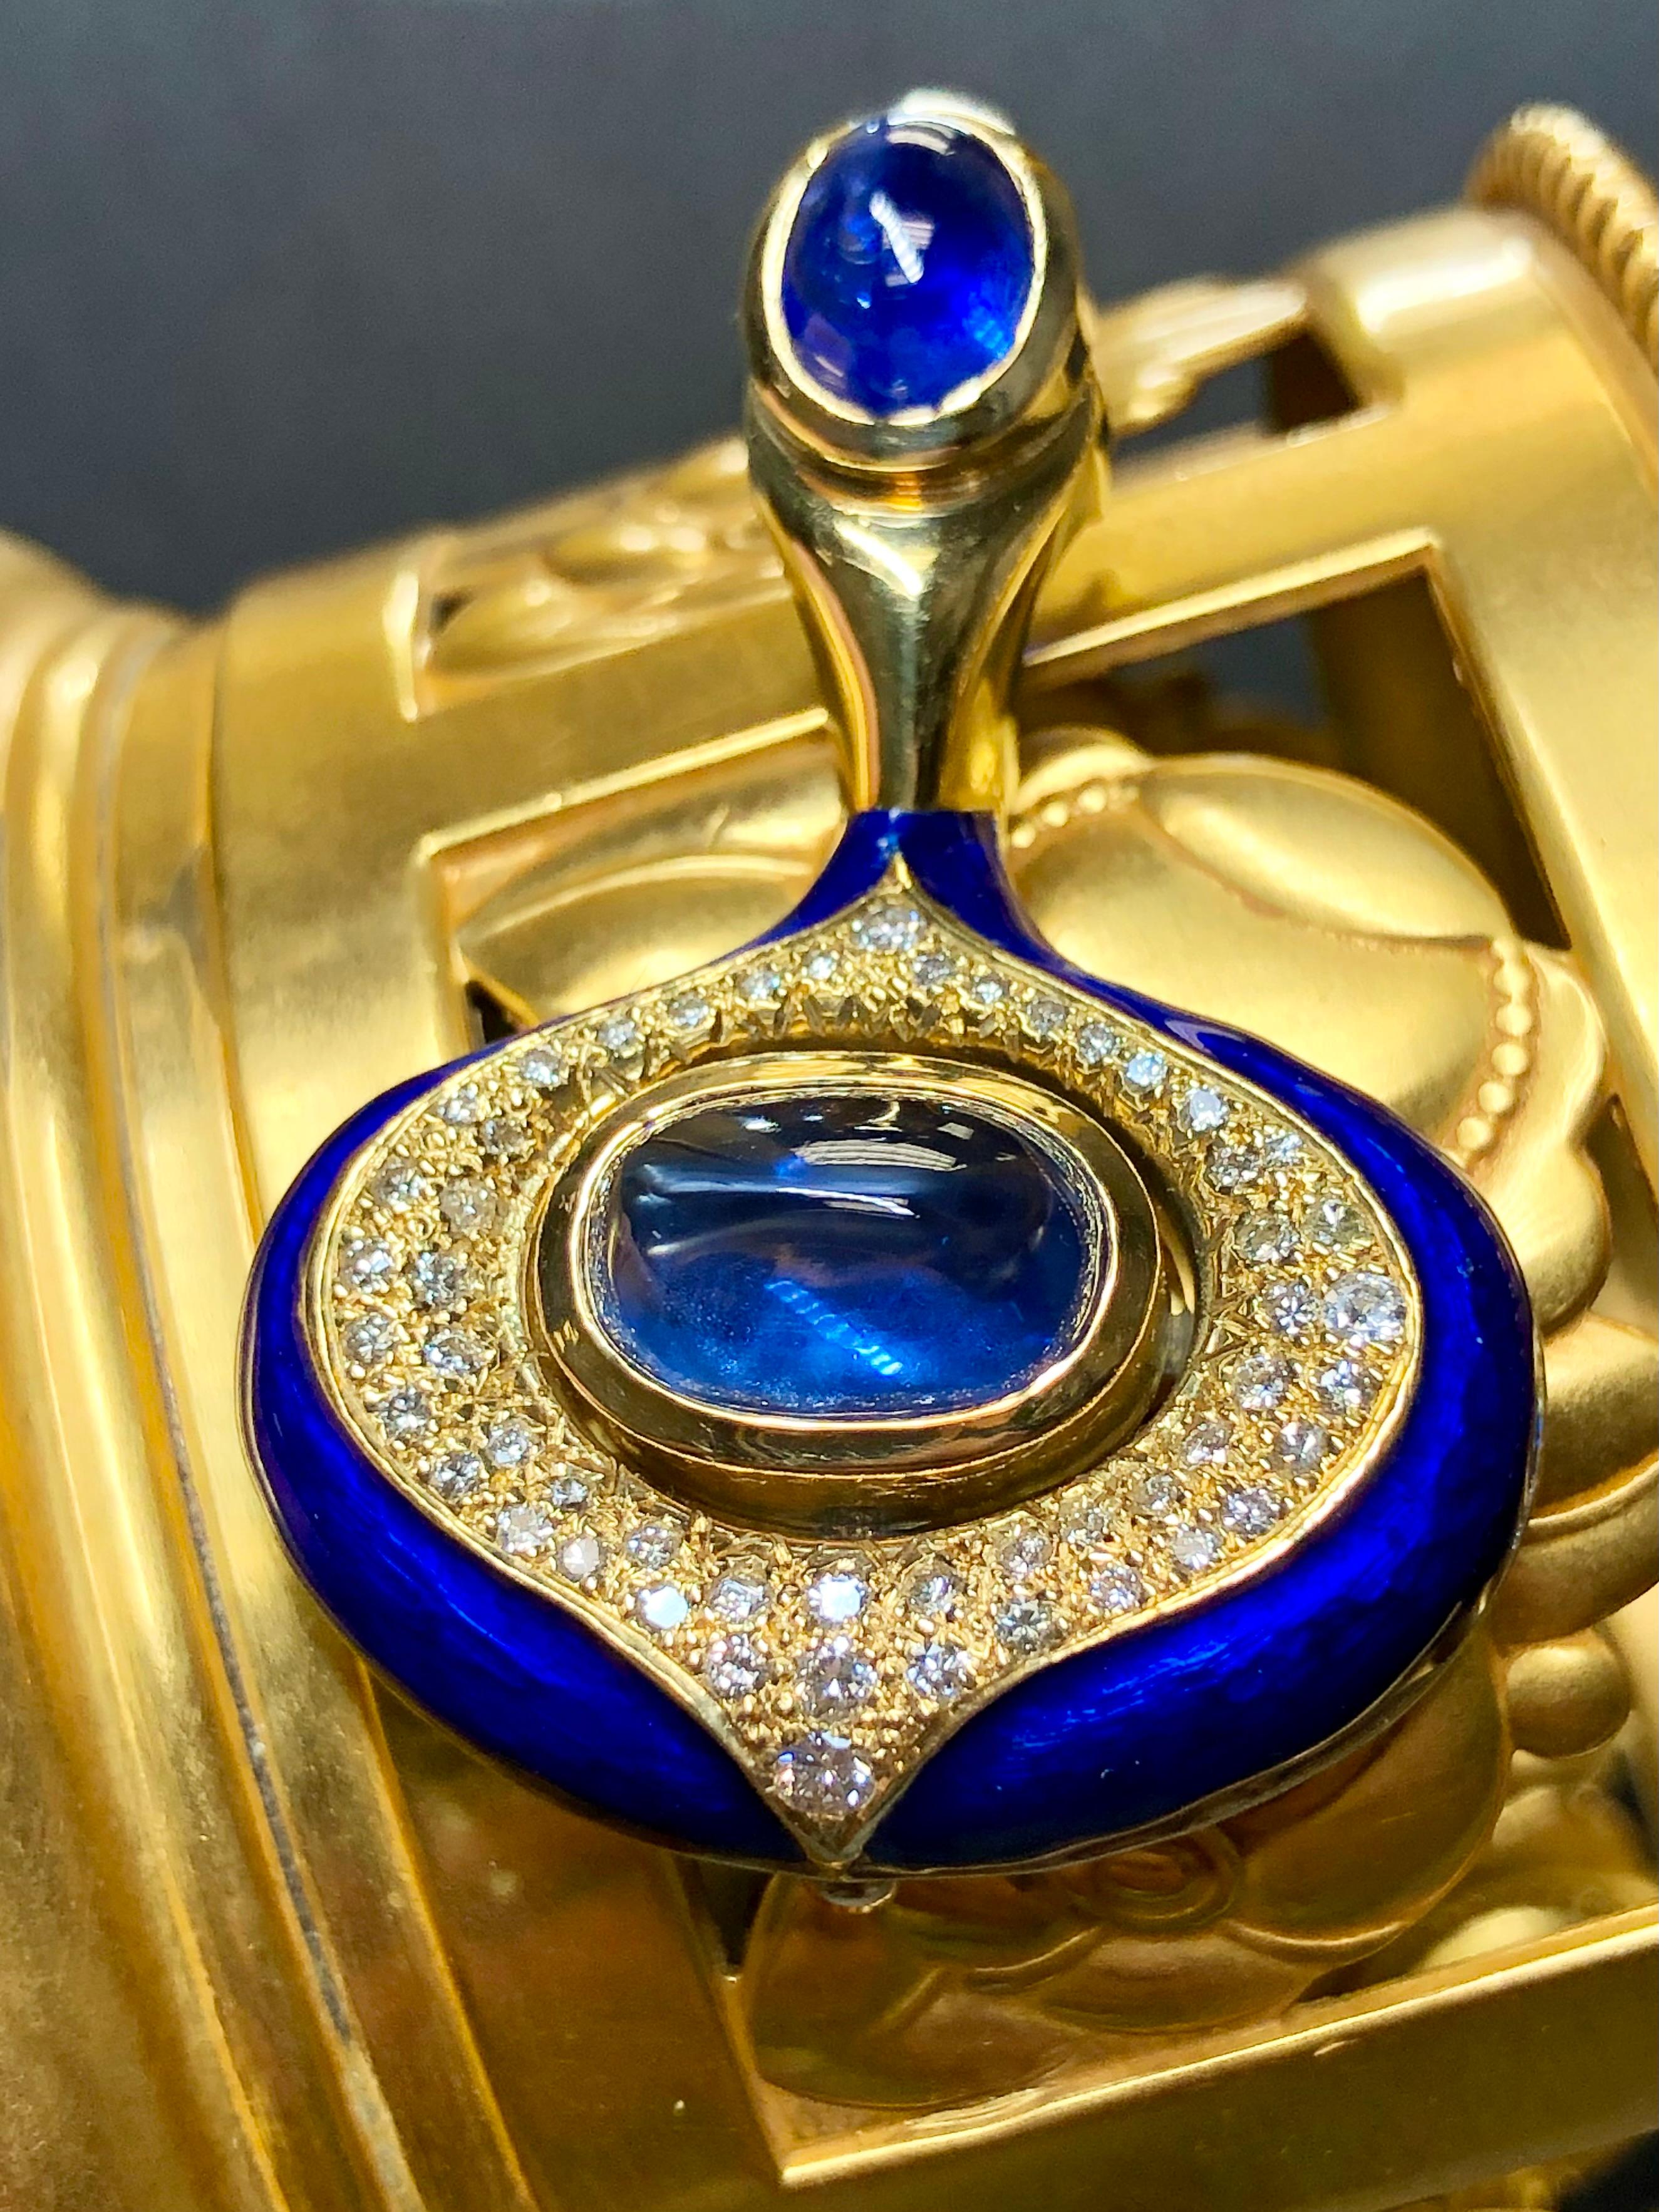 
A one-of-a-kind and most likely commissioned. It is hand wrought in 18K yellow gold and finished in royal blue enamel with both the top and bottom sections centered by large cabochon sapphires with the largest being a sugarloaf. The top sapphire